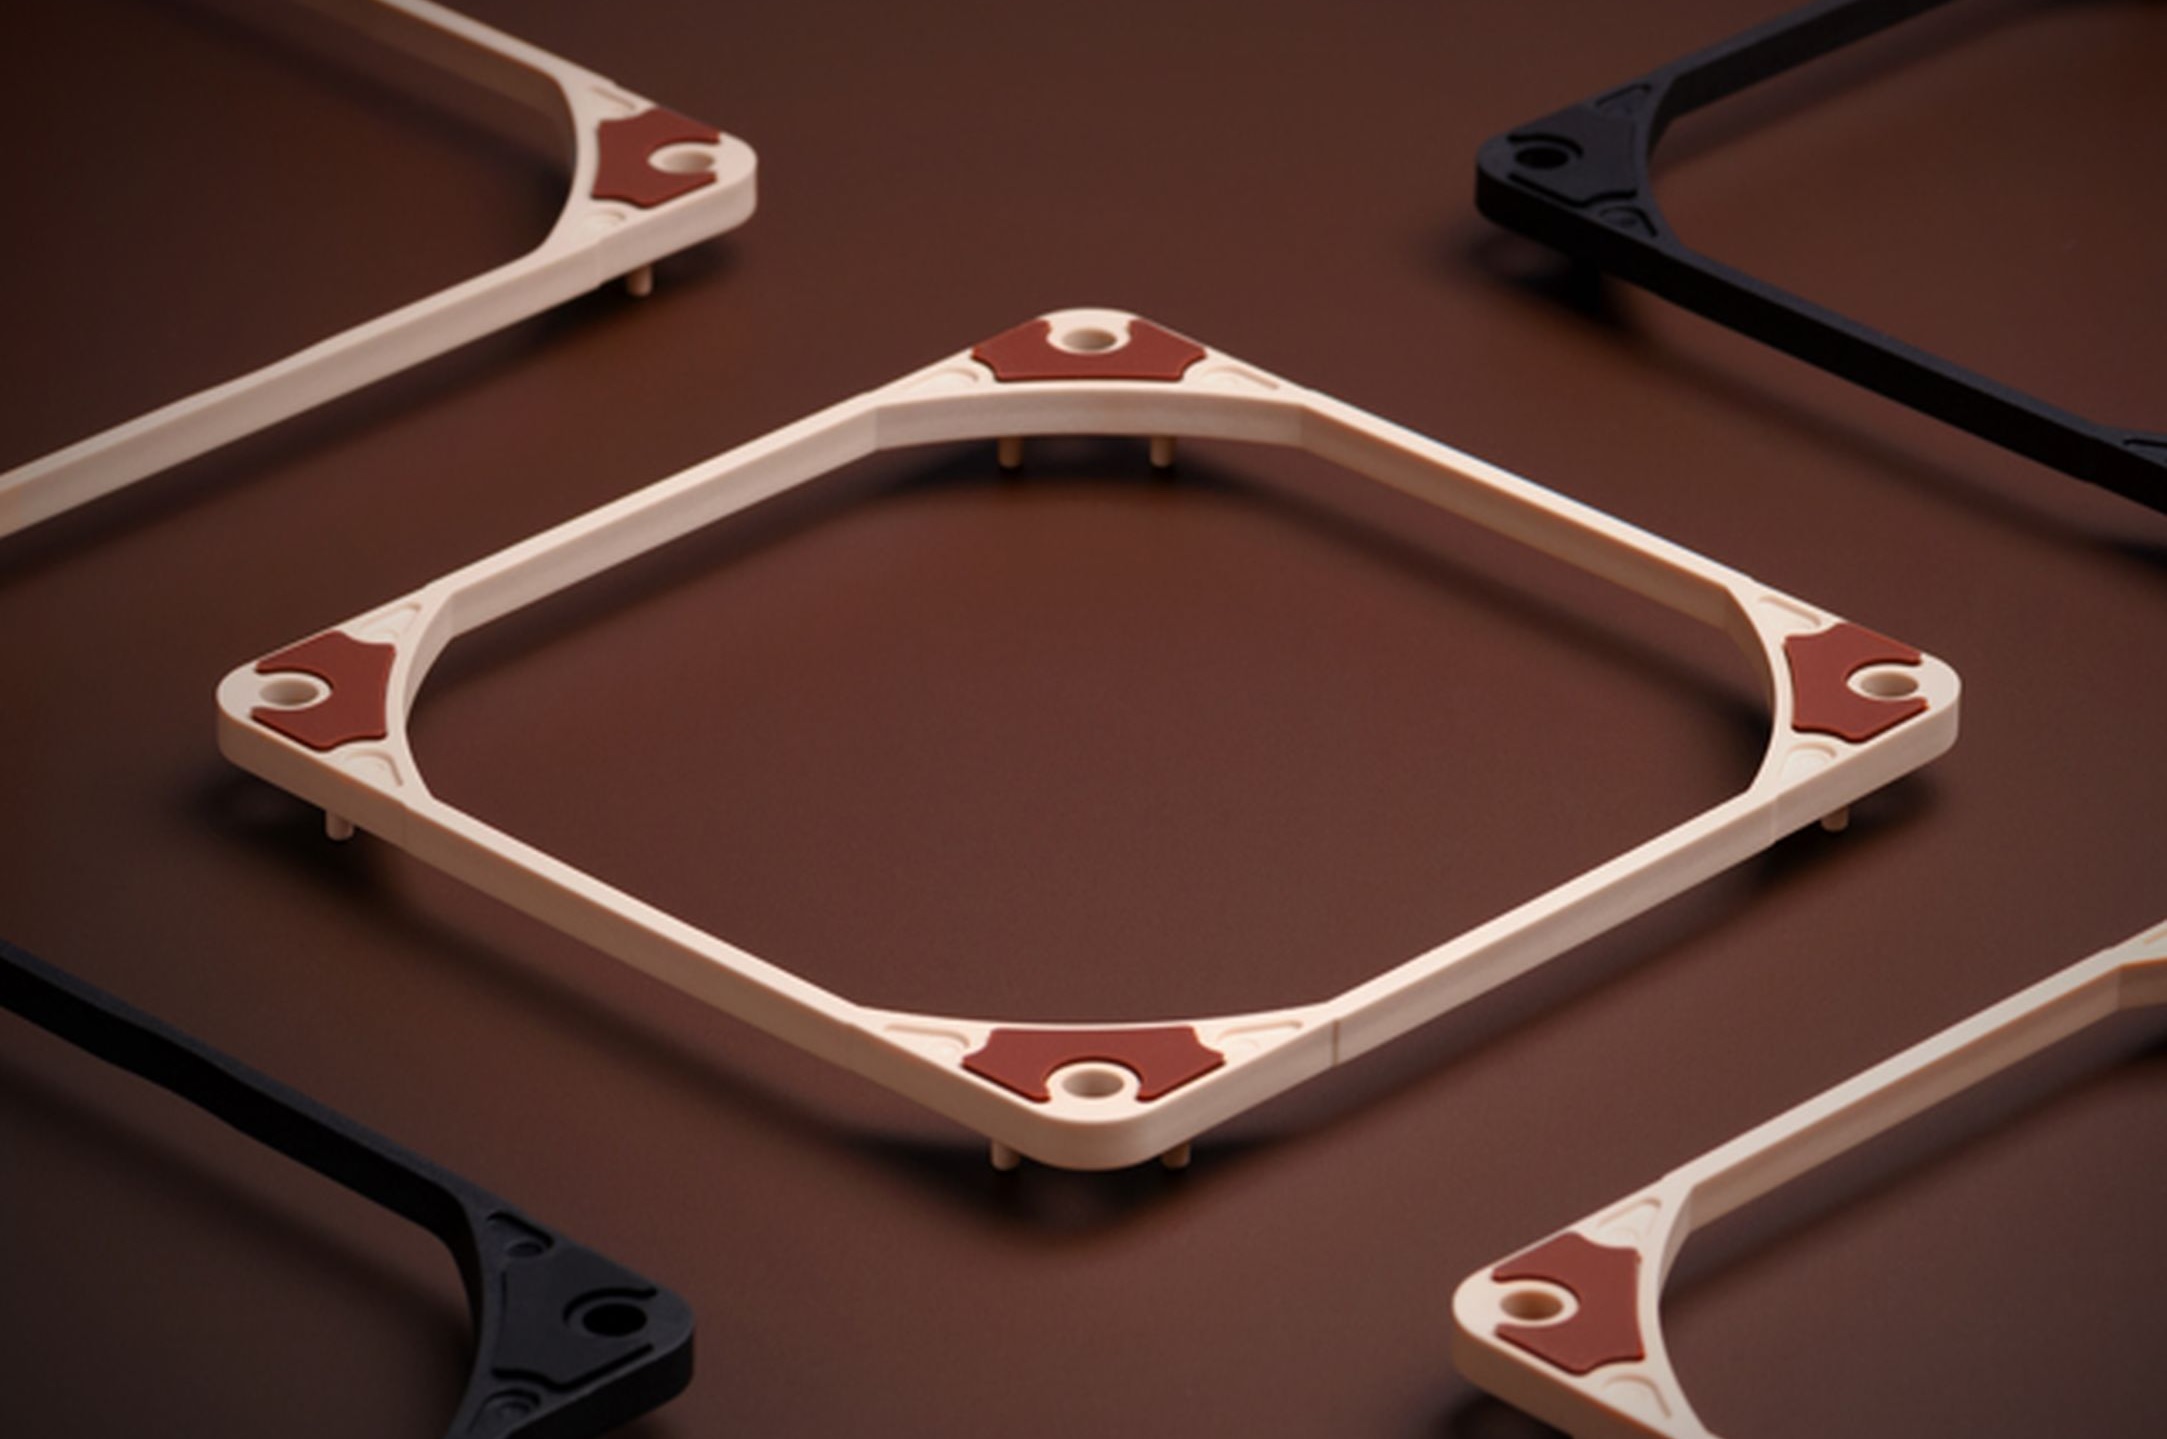 Noctua's fan 8 years in the making could be the last you'll ever need